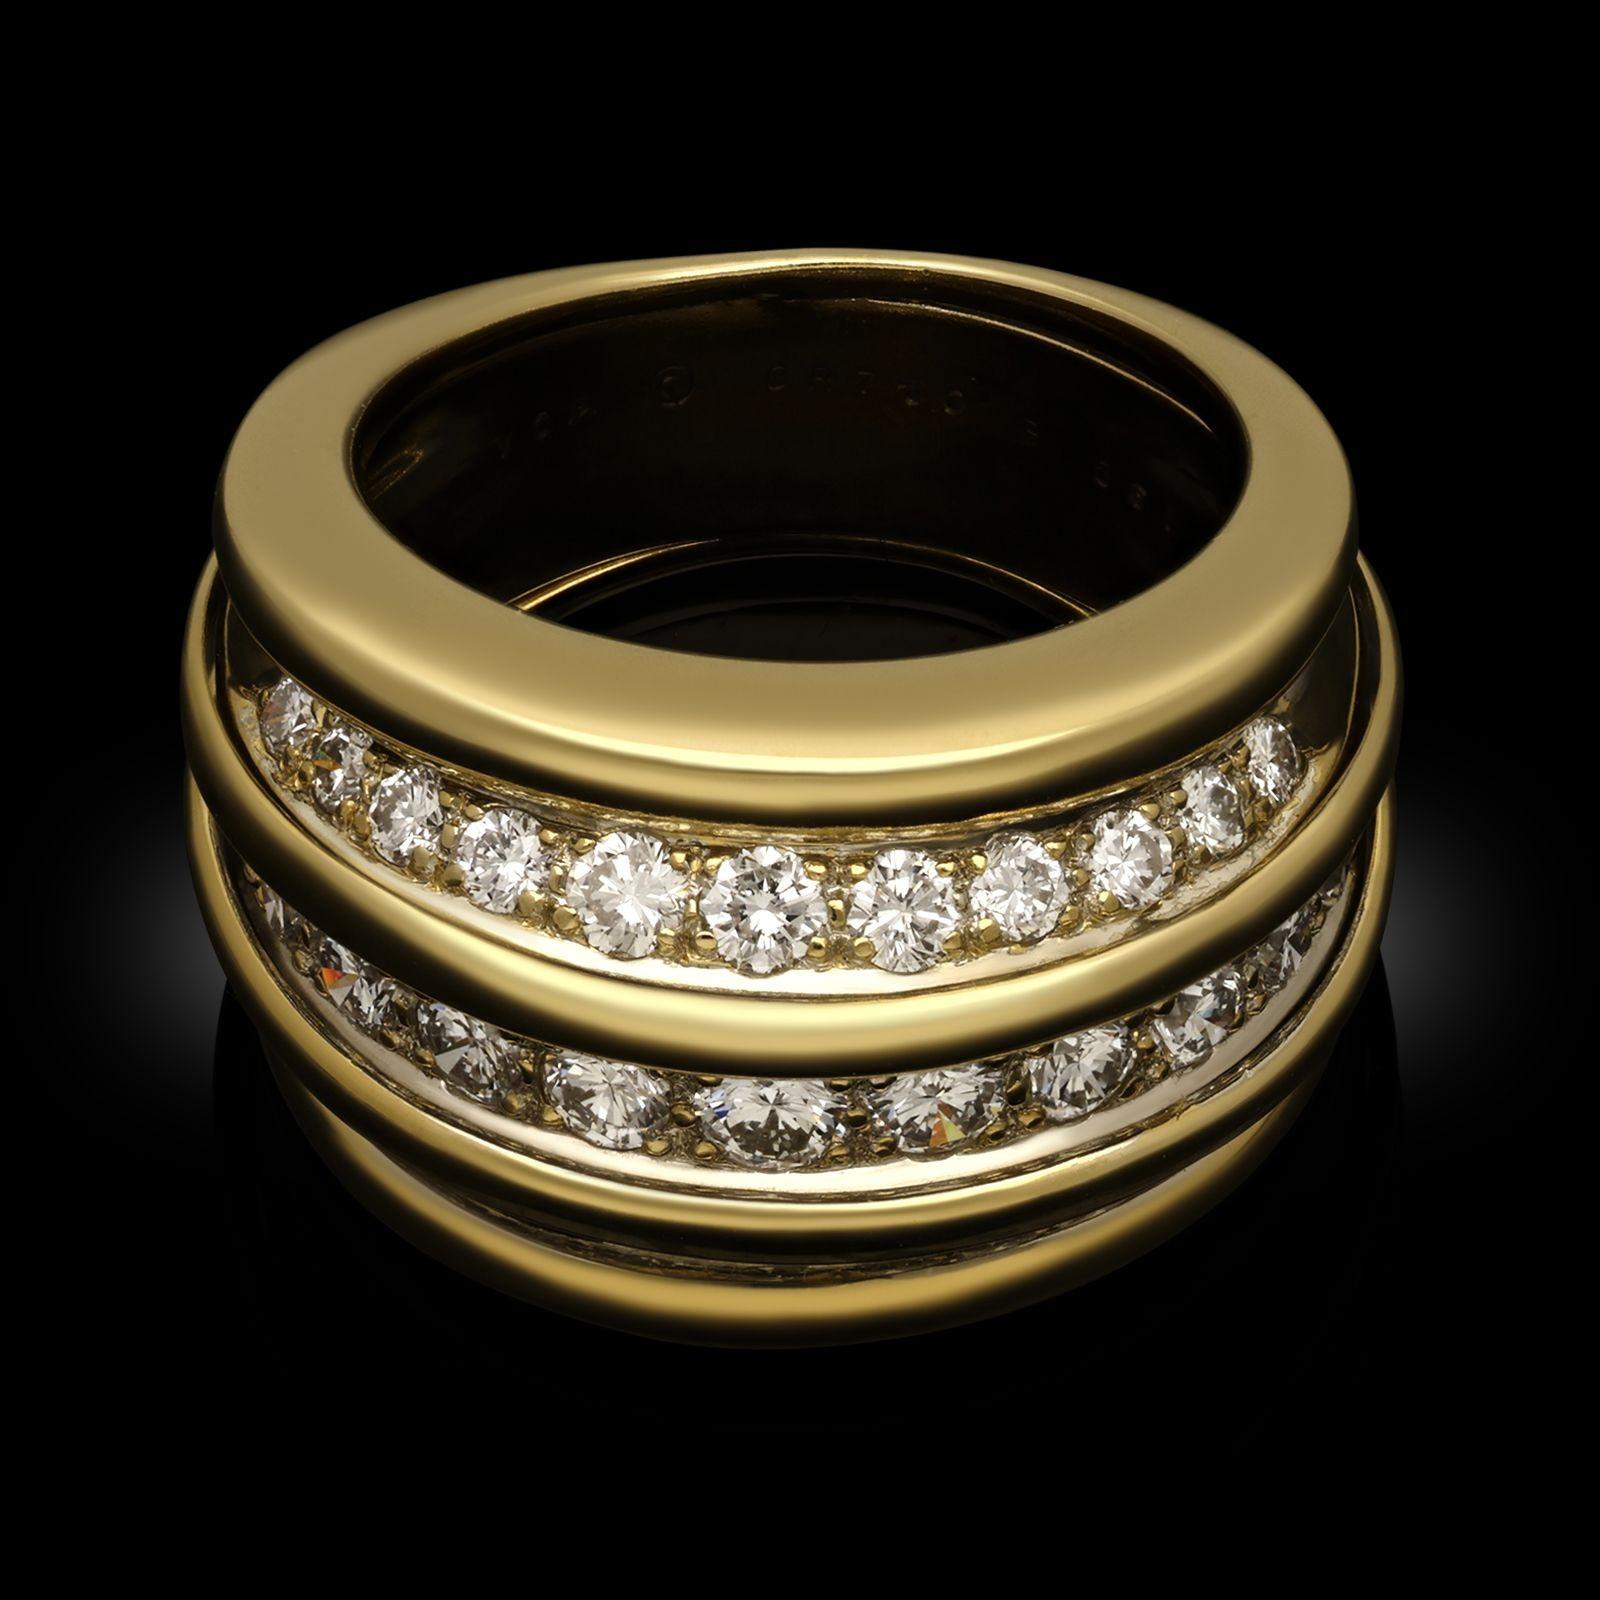 A vintage diamond and yellow gold dress ring by Van Cleef & Arpels, 1980s. The ring is designed with three channels of white round brilliant cut diamonds graduating in size, all grain set in 18ct yellow gold with a bombe shaped, fluted profile